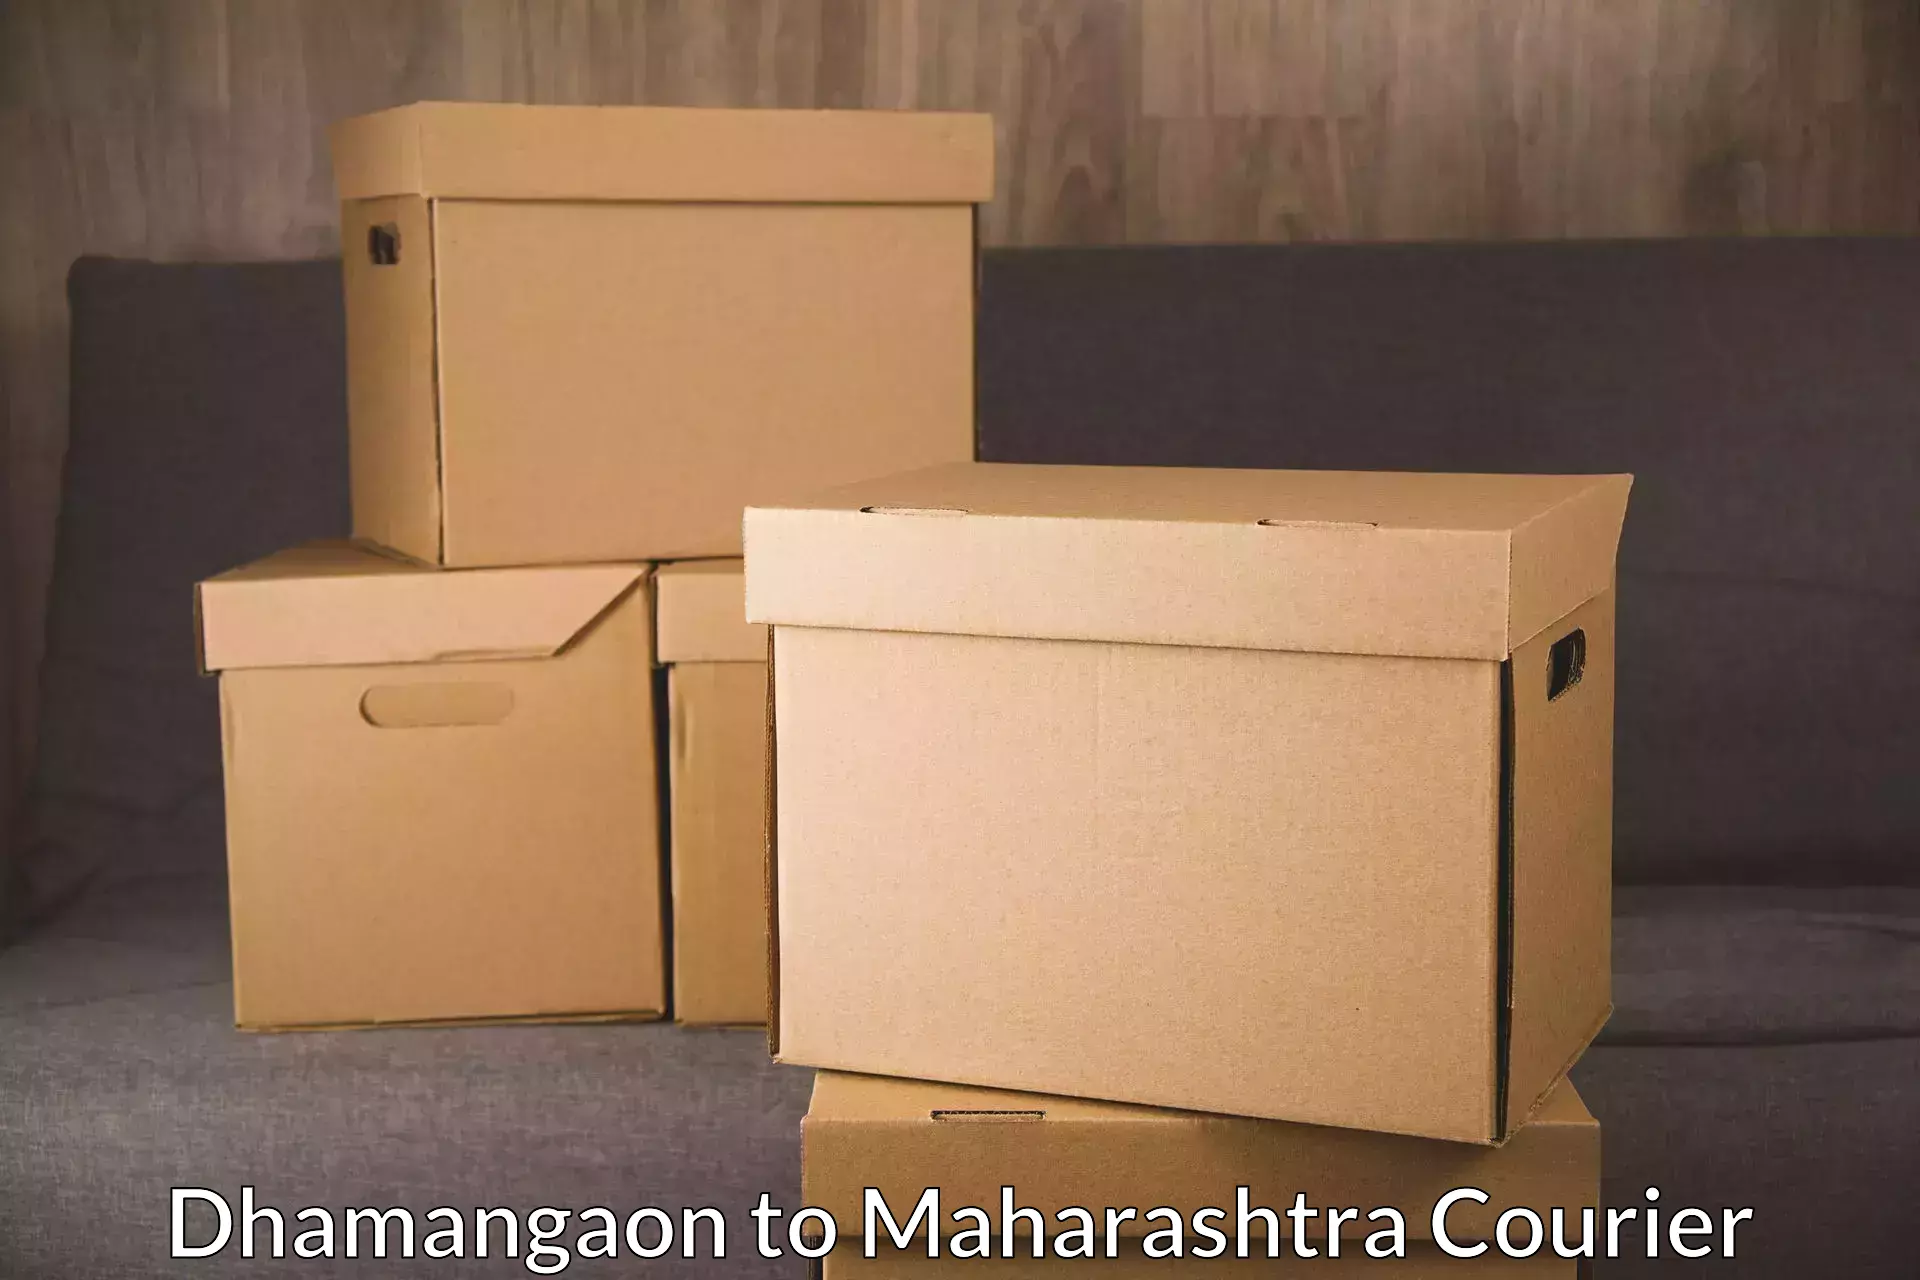 Express postal services in Dhamangaon to Ambegaon